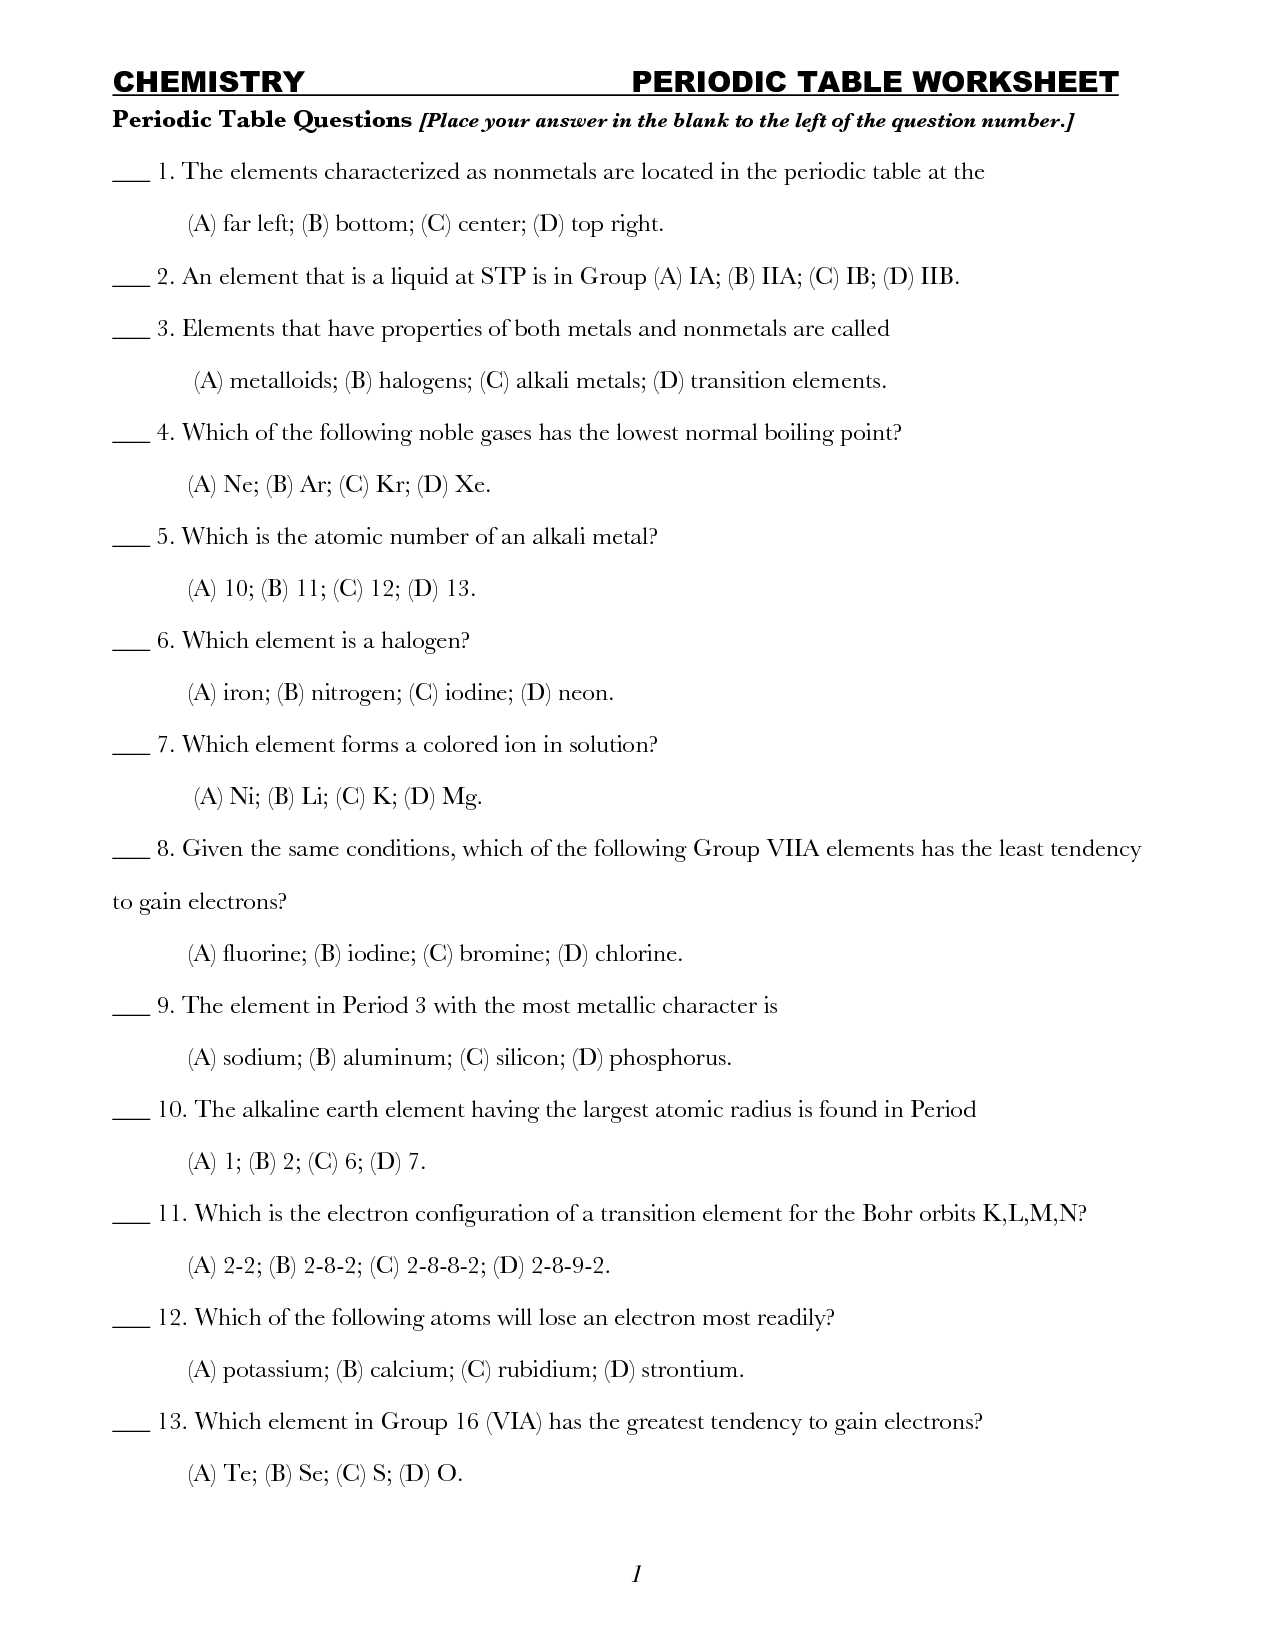 Interpreting Graphics Worksheet Answers Chemistry with Periodic Table Worksheet Answer Key Periodic Table